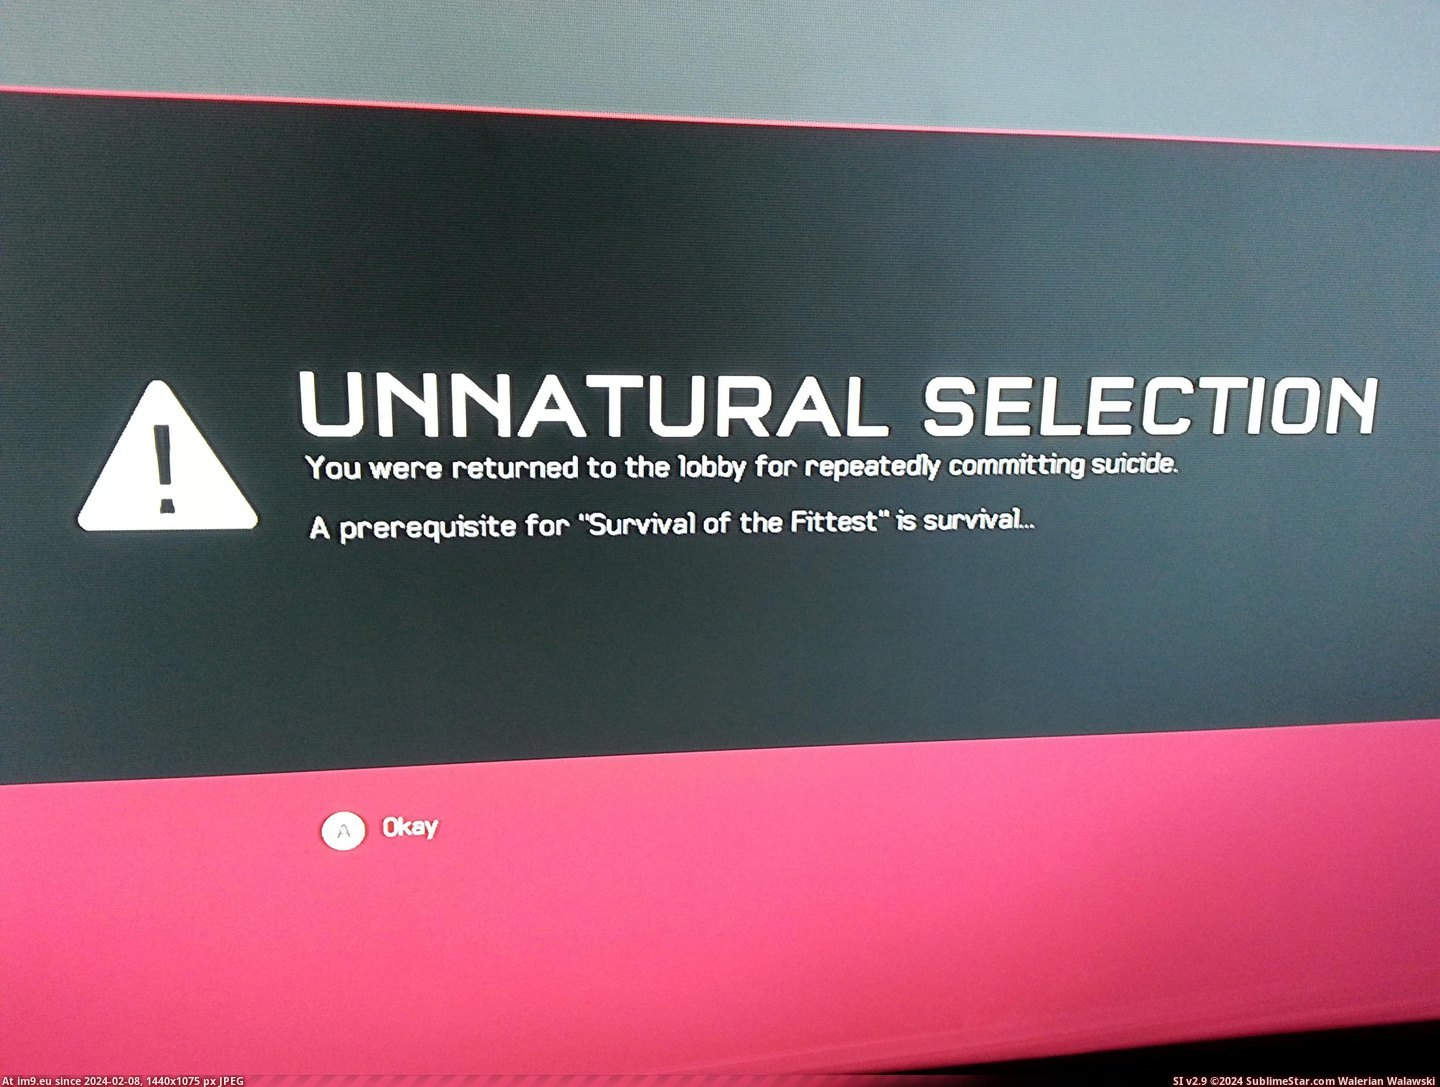 #Gaming #Little #Message #Amusing #Committed #Suicide #Halo [Gaming] Committed suicide 3 times in Halo 5 and got this amusing little message Pic. (Image of album My r/GAMING favs))